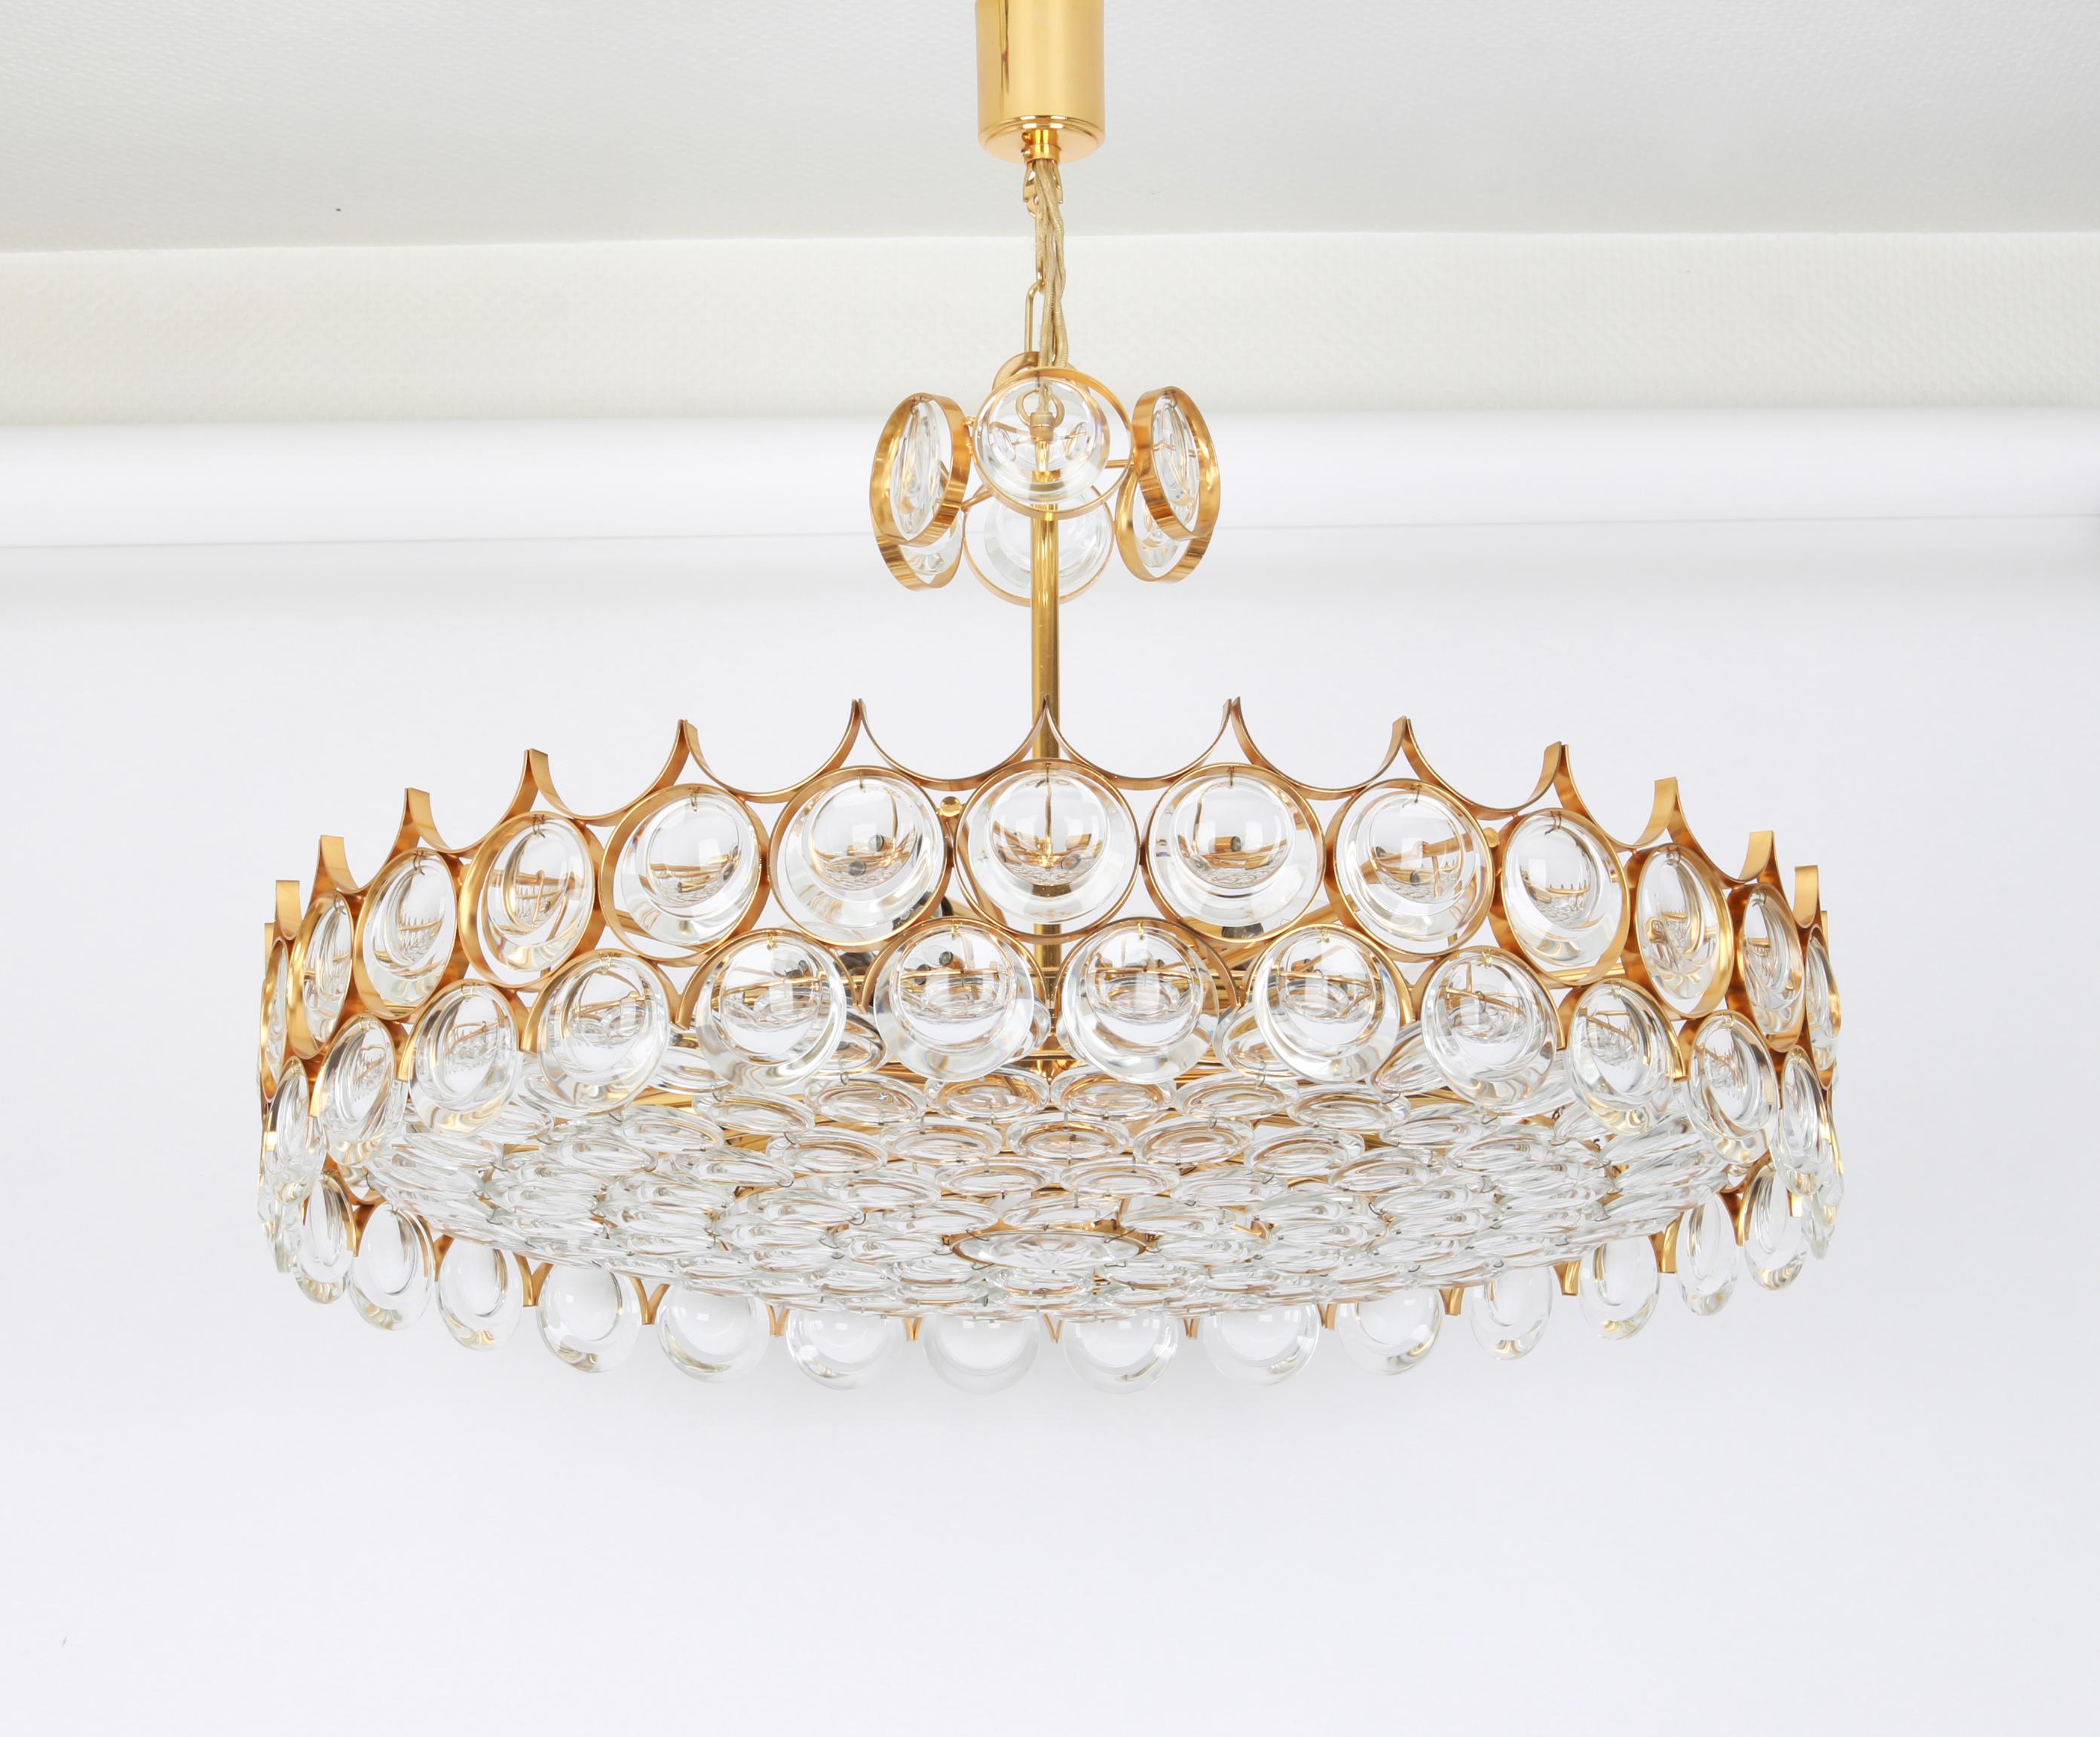 A wonderful and high quality gilded chandelier or pendant light fixture by Palwa -Design Sciolari, Germany, 1970s.
It is made of a 24 carat gold-plated brass frame decorated with individual 